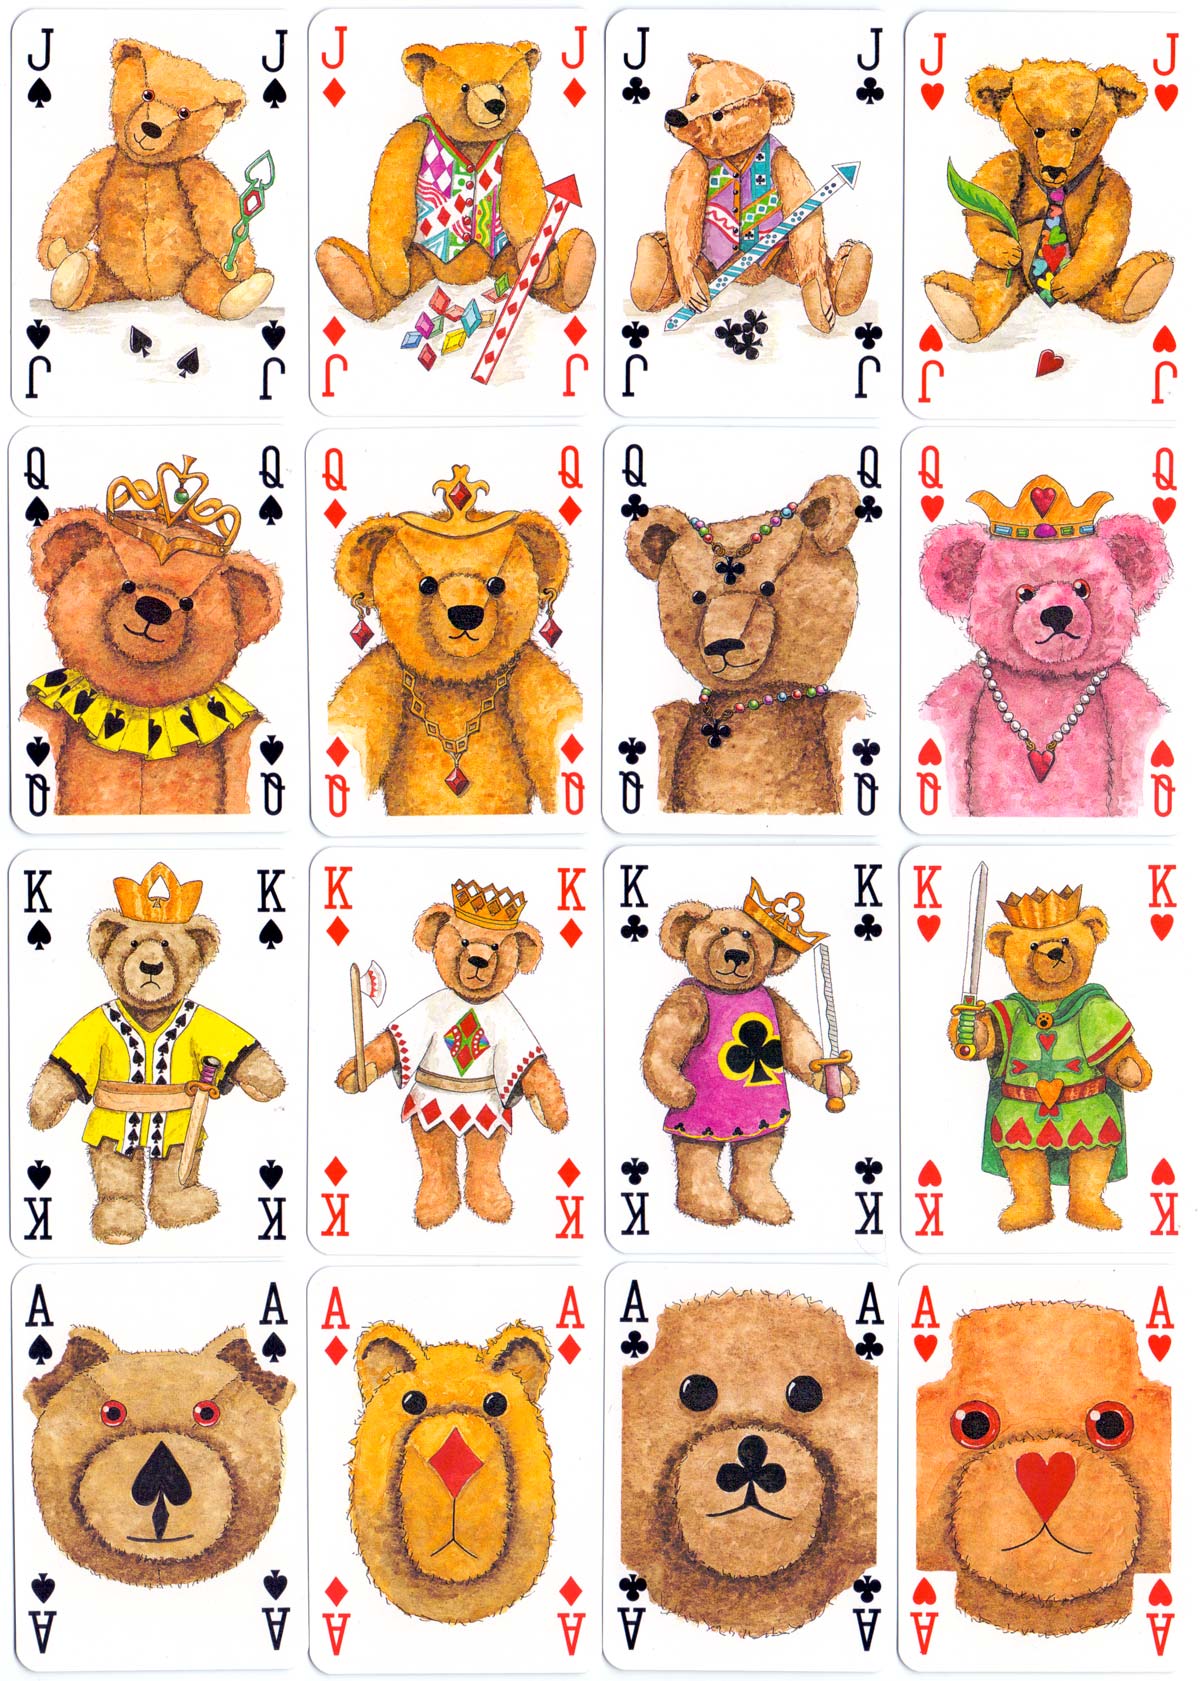 The Teddy Bear pack of playing cards created by Peter Wood, 1994